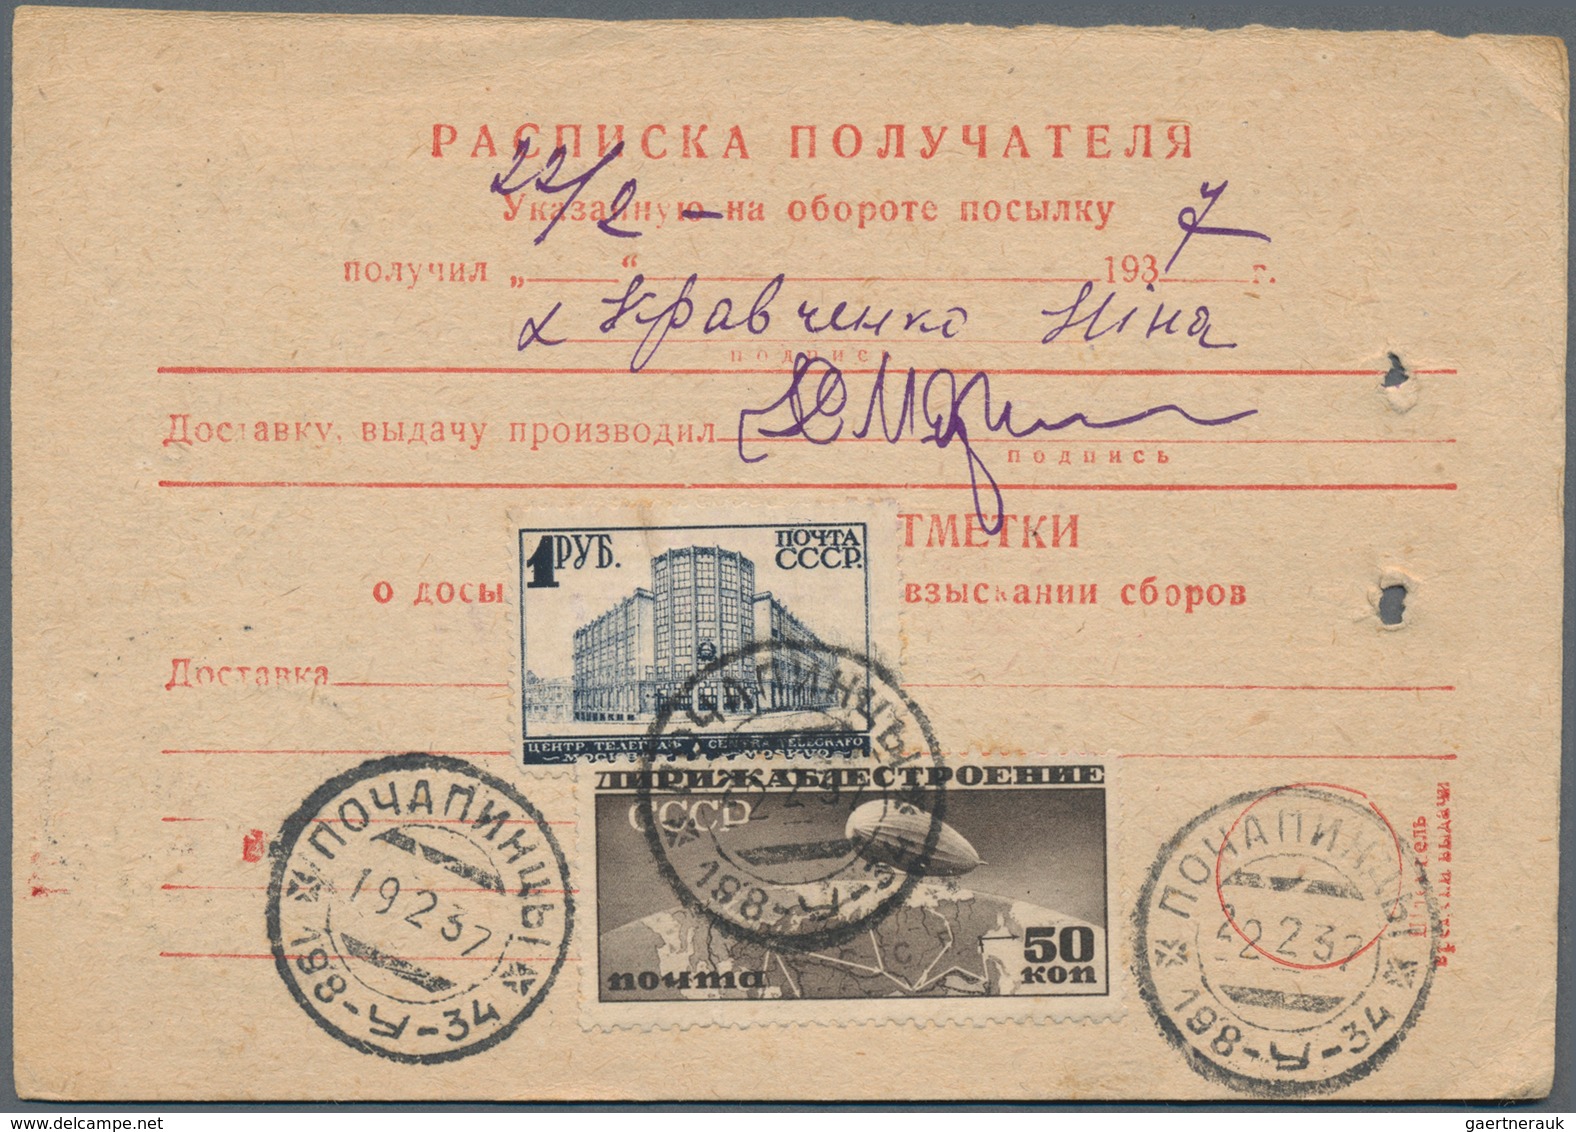 Sowjetunion: 1923/91, very interesting accumulation of approx. 100 covers, postcards and unused and